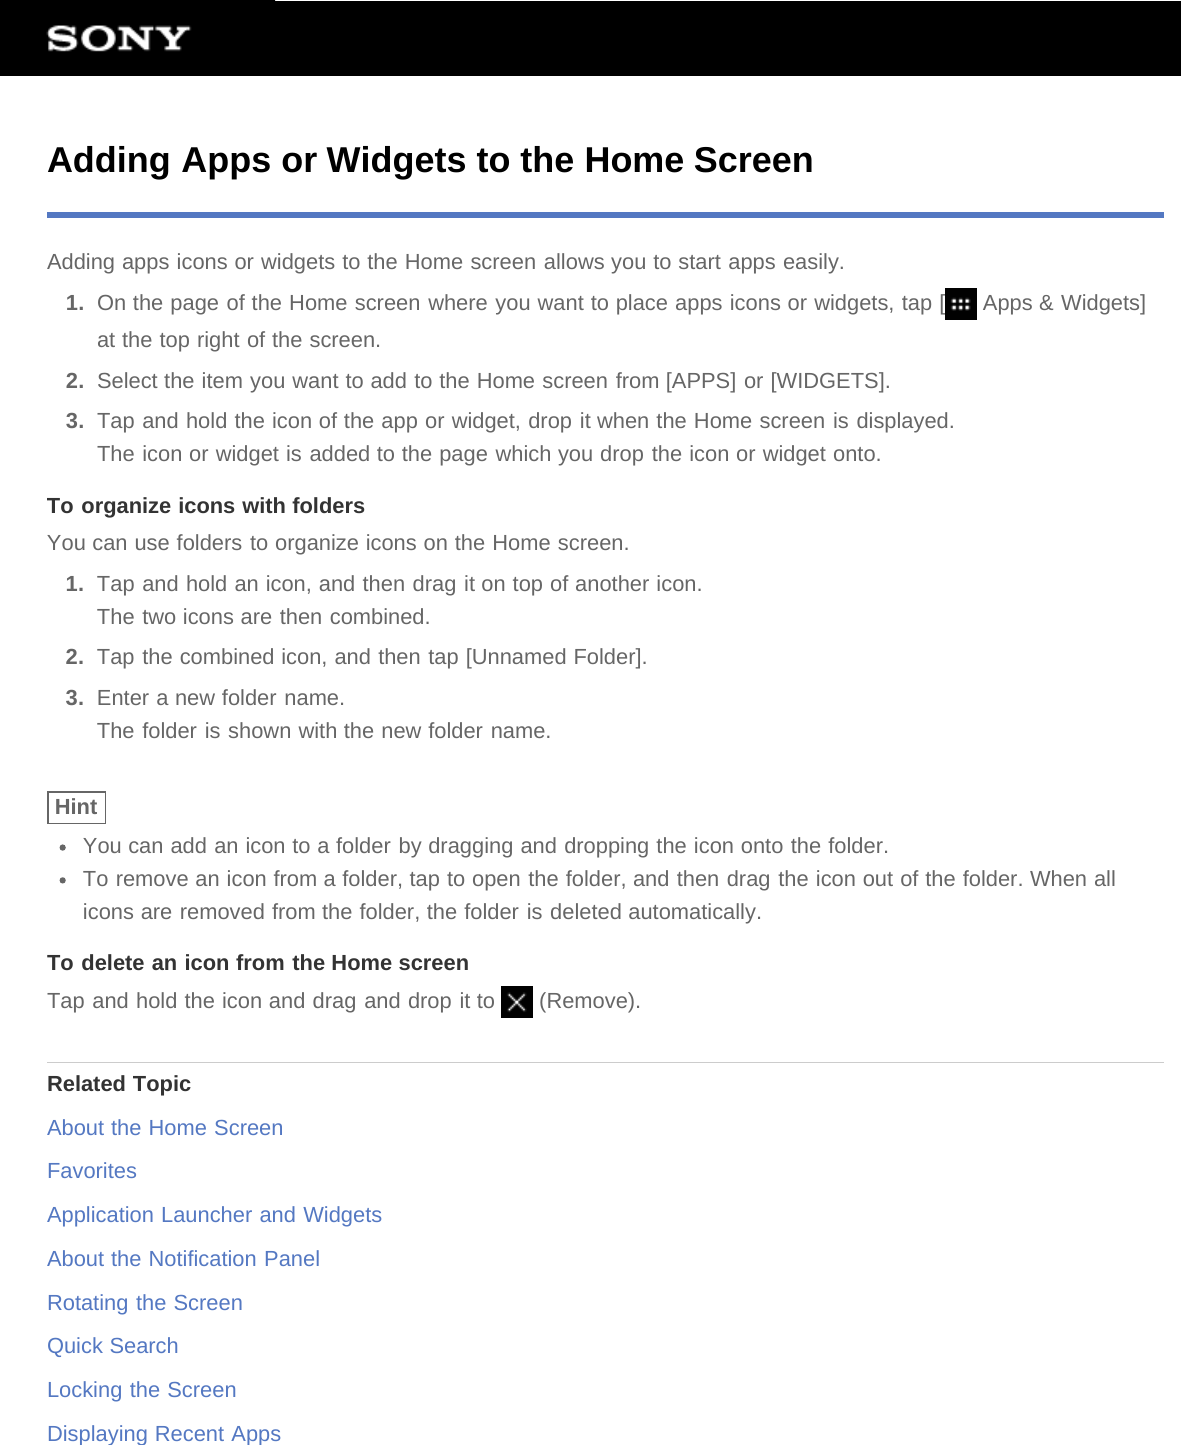 Adding Apps or Widgets to the Home ScreenAdding apps icons or widgets to the Home screen allows you to start apps easily.1.  On the page of the Home screen where you want to place apps icons or widgets, tap [  Apps &amp; Widgets]at the top right of the screen.2.  Select the item you want to add to the Home screen from [APPS] or [WIDGETS].3.  Tap and hold the icon of the app or widget, drop it when the Home screen is displayed.The icon or widget is added to the page which you drop the icon or widget onto.To organize icons with foldersYou can use folders to organize icons on the Home screen.1.  Tap and hold an icon, and then drag it on top of another icon.The two icons are then combined.2.  Tap the combined icon, and then tap [Unnamed Folder].3.  Enter a new folder name.The folder is shown with the new folder name.HintYou can add an icon to a folder by dragging and dropping the icon onto the folder.To remove an icon from a folder, tap to open the folder, and then drag the icon out of the folder. When allicons are removed from the folder, the folder is deleted automatically.To delete an icon from the Home screenTap and hold the icon and drag and drop it to   (Remove).Related TopicAbout the Home ScreenFavoritesApplication Launcher and WidgetsAbout the Notification PanelRotating the ScreenQuick SearchLocking the ScreenDisplaying Recent Apps